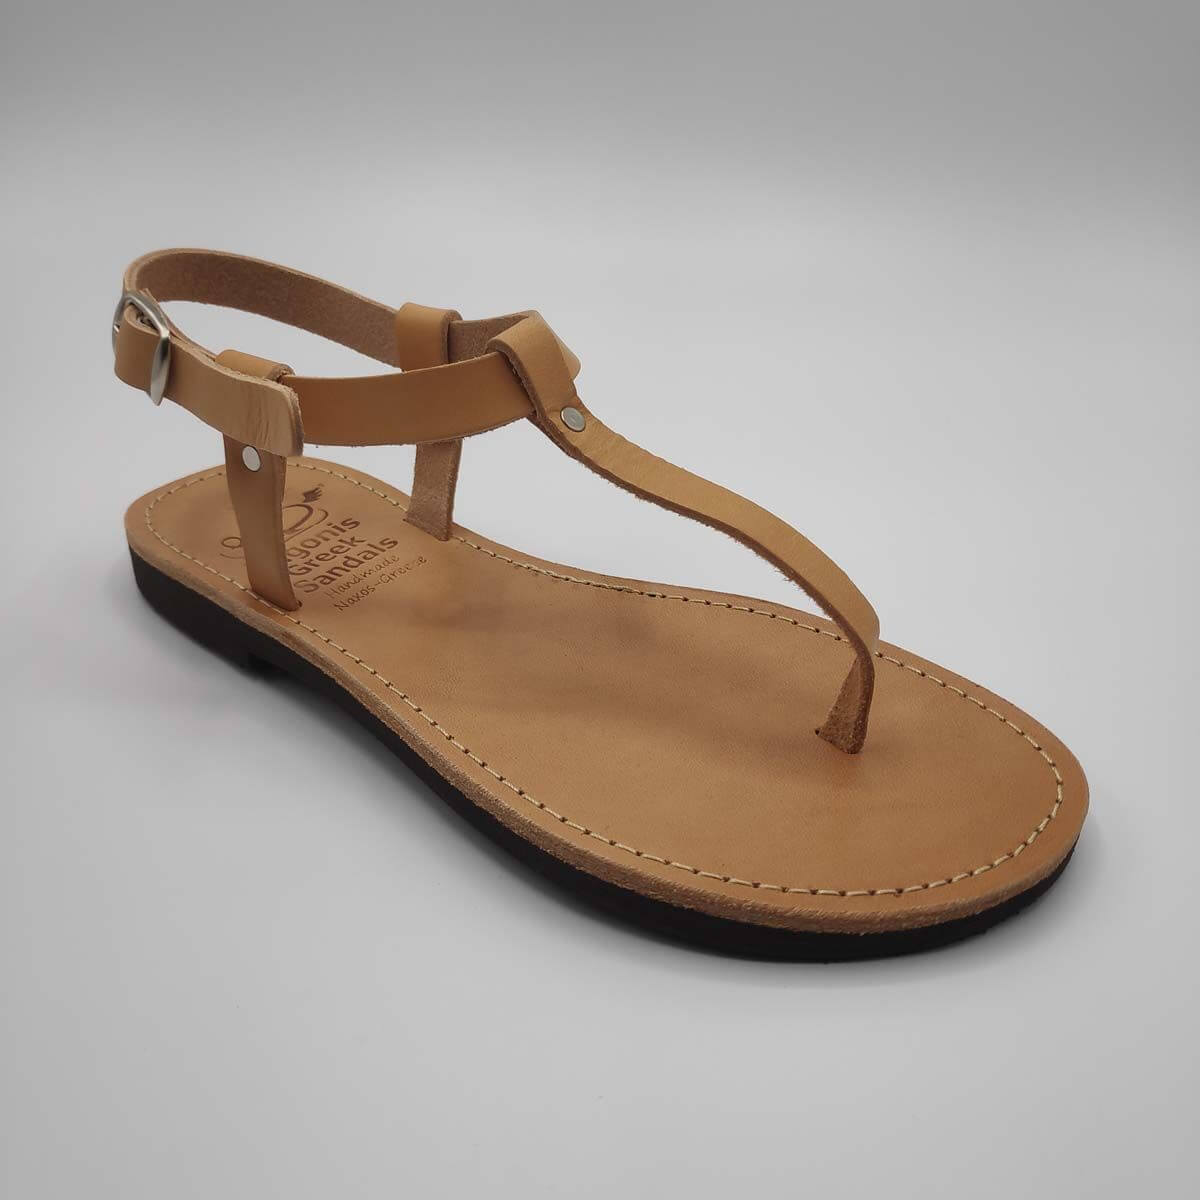 women's thong sandals with backstrap